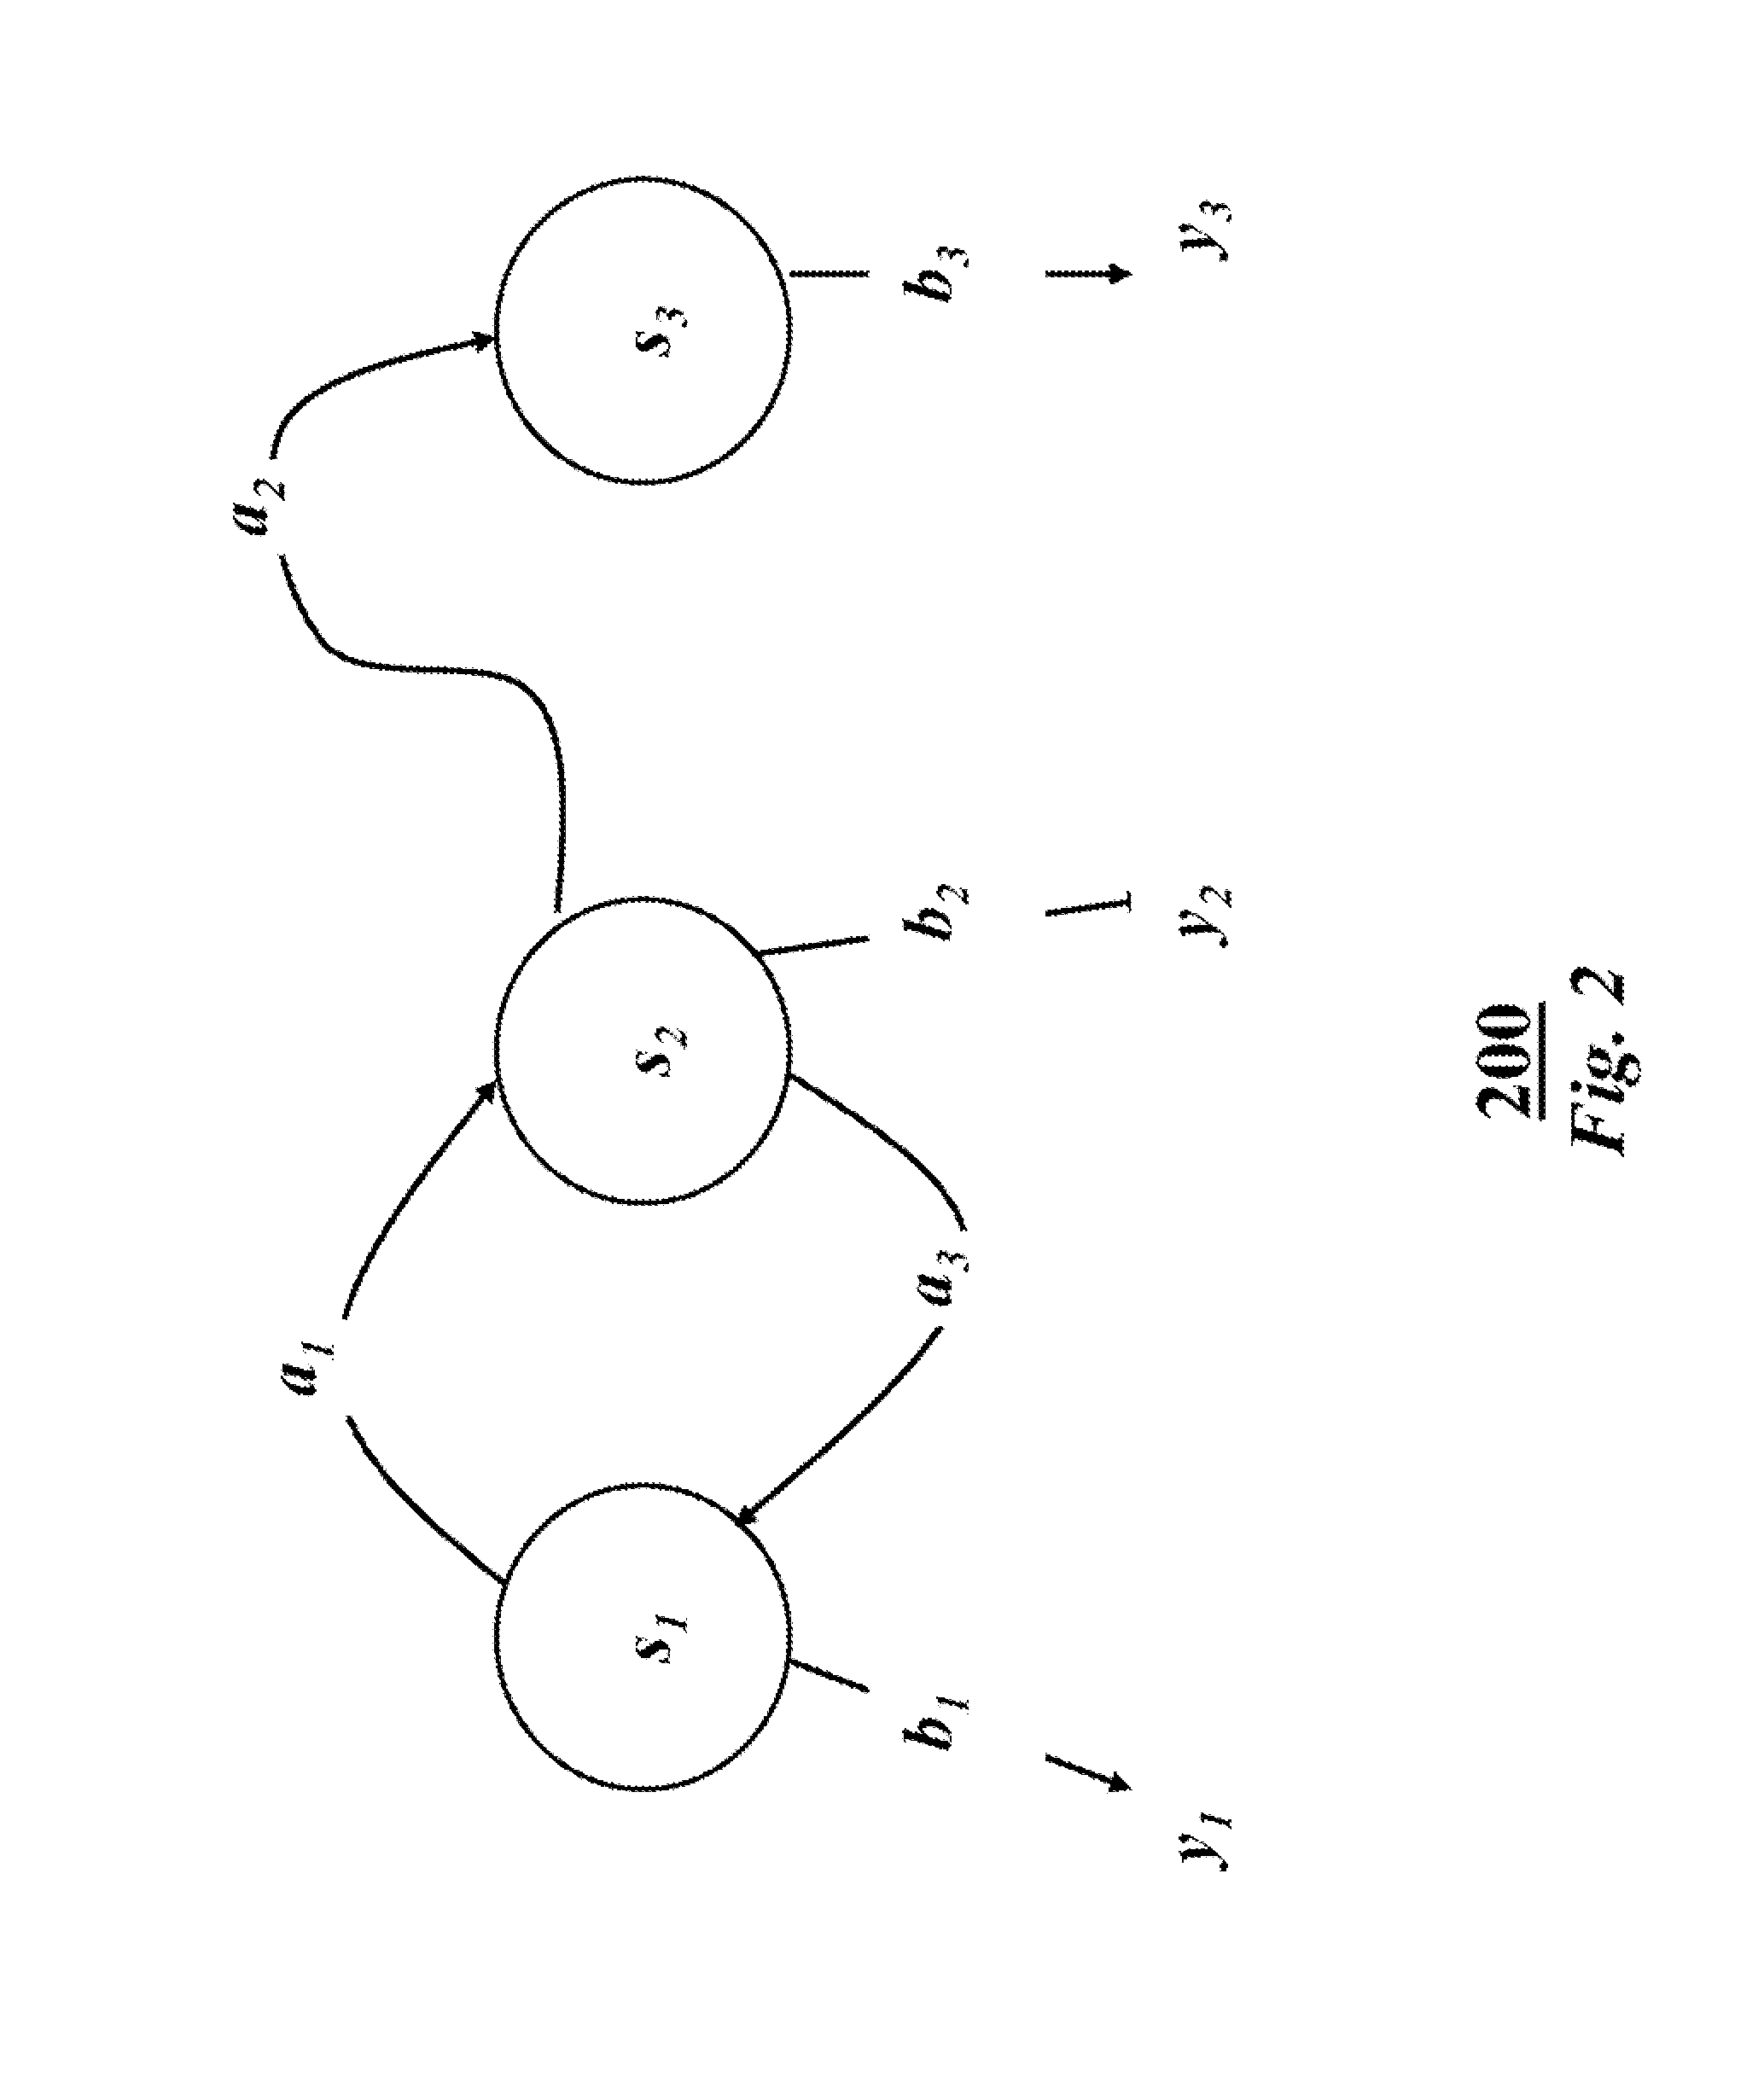 System and method for recognizing speech securely using a secure multi-party computation protocol